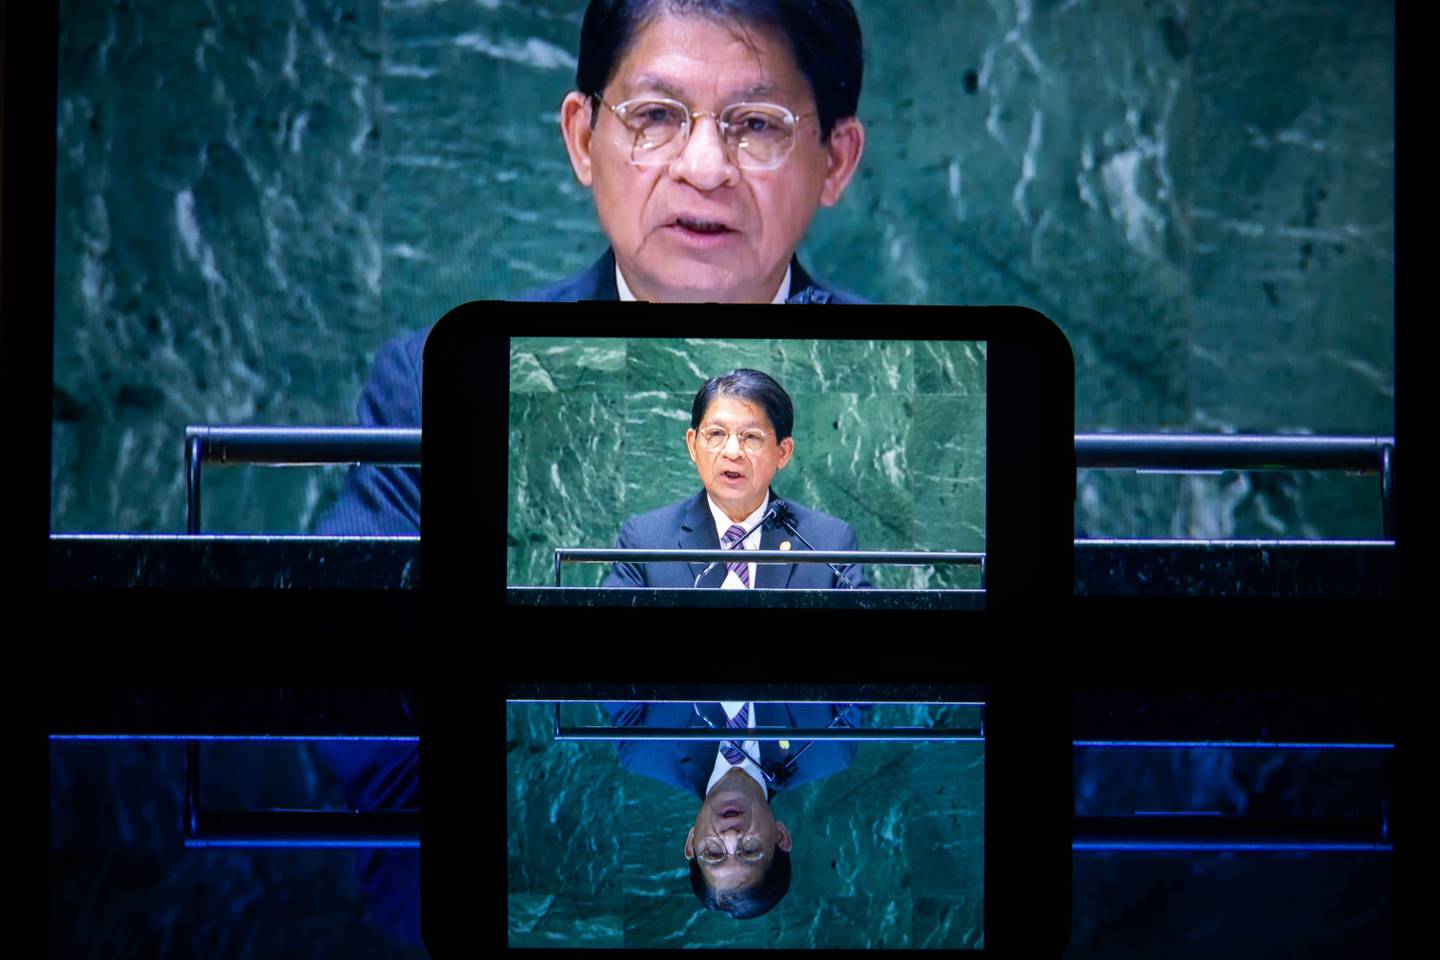 Denis Moncada Colindres, Nicaragua's foreign minister, speaks during the United Nations General Assembly via live stream in New York, U.S., on Monday, Sept. 27, 2021. A scaled-back United Nations General Assembly returns to Manhattan after going completely virtual last year, but fears about a possible spike in Covid-19 cases are making people in the host city less enthusiastic about the annual diplomatic gathering. Photographer: Michael Nagle/Bloomberg